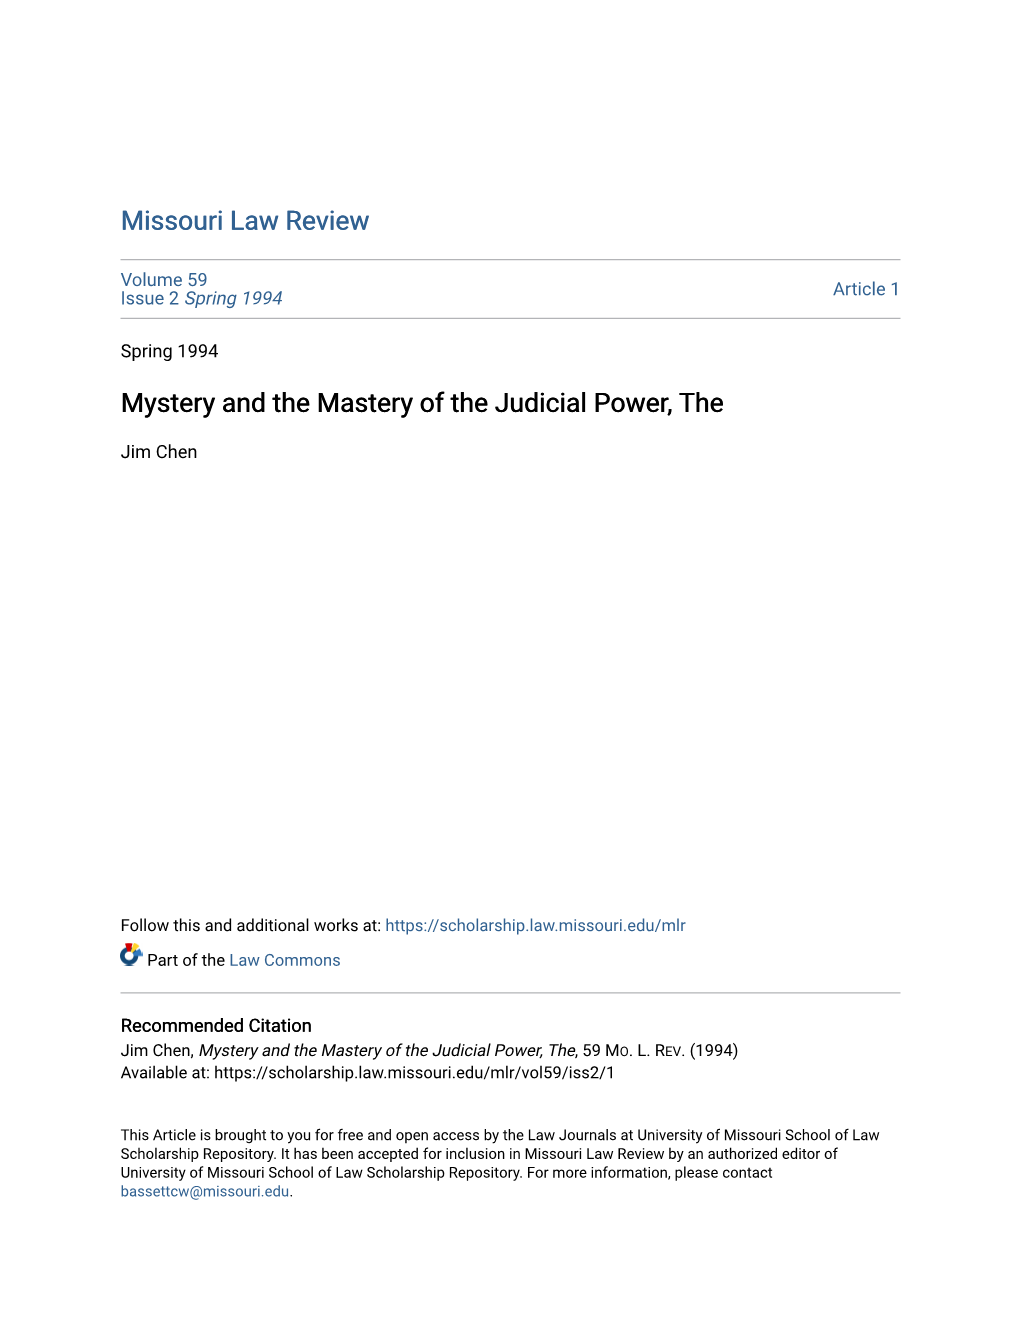 Mystery and the Mastery of the Judicial Power, The